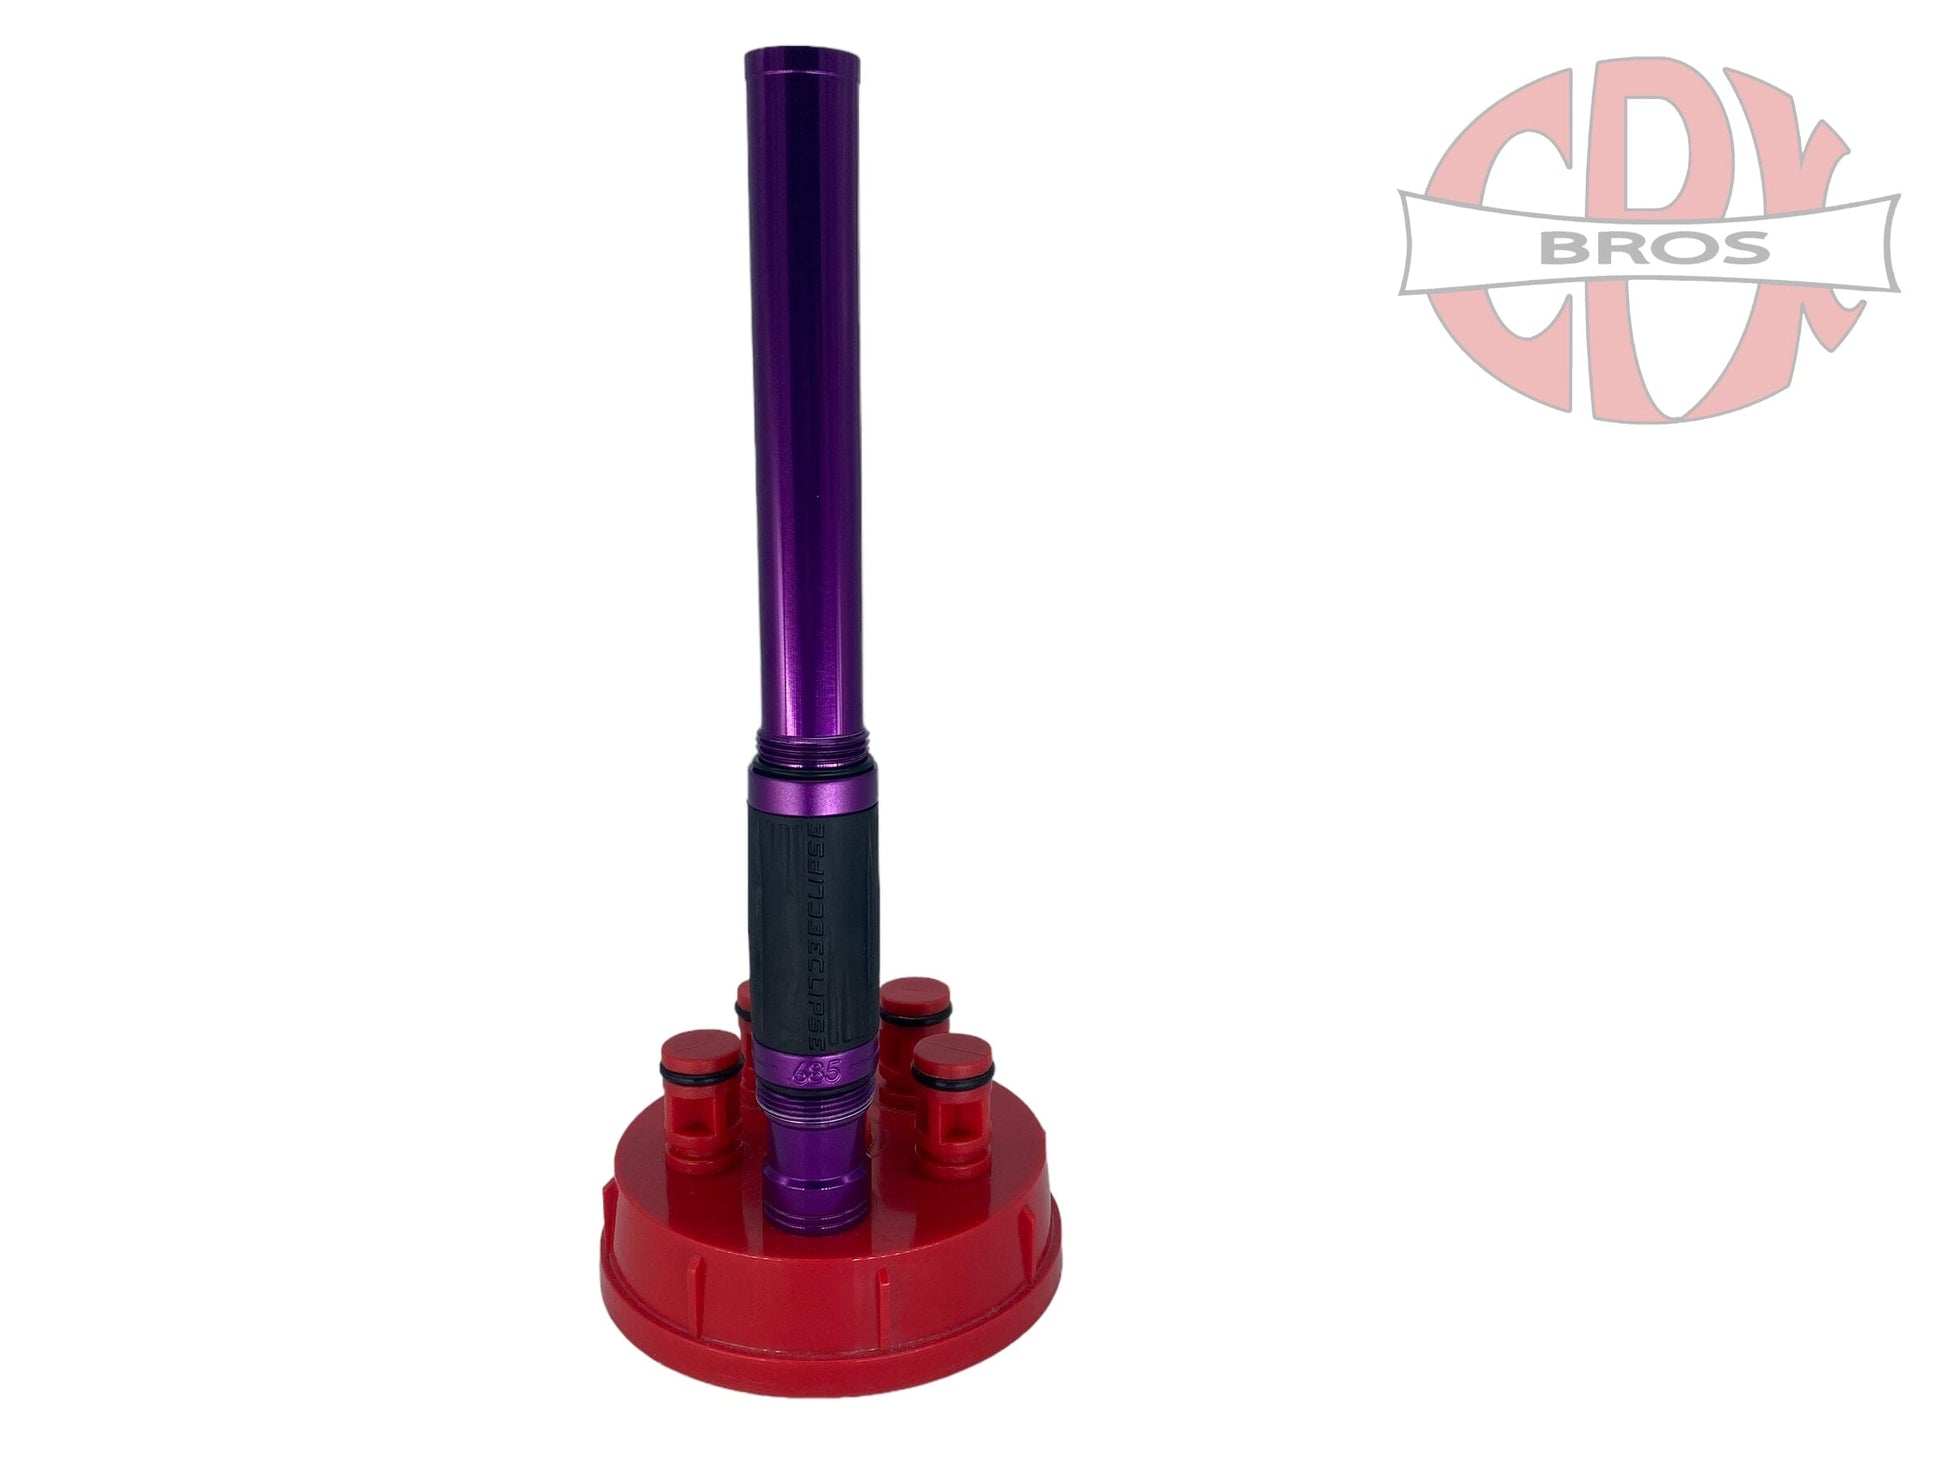 Used Planet Eclipse Shaft Fl Barrel .685 Back-Purple Paintball Gun from CPXBrosPaintball Buy/Sell/Trade Paintball Markers, Paintball Hoppers, Paintball Masks, and Hormesis Headbands